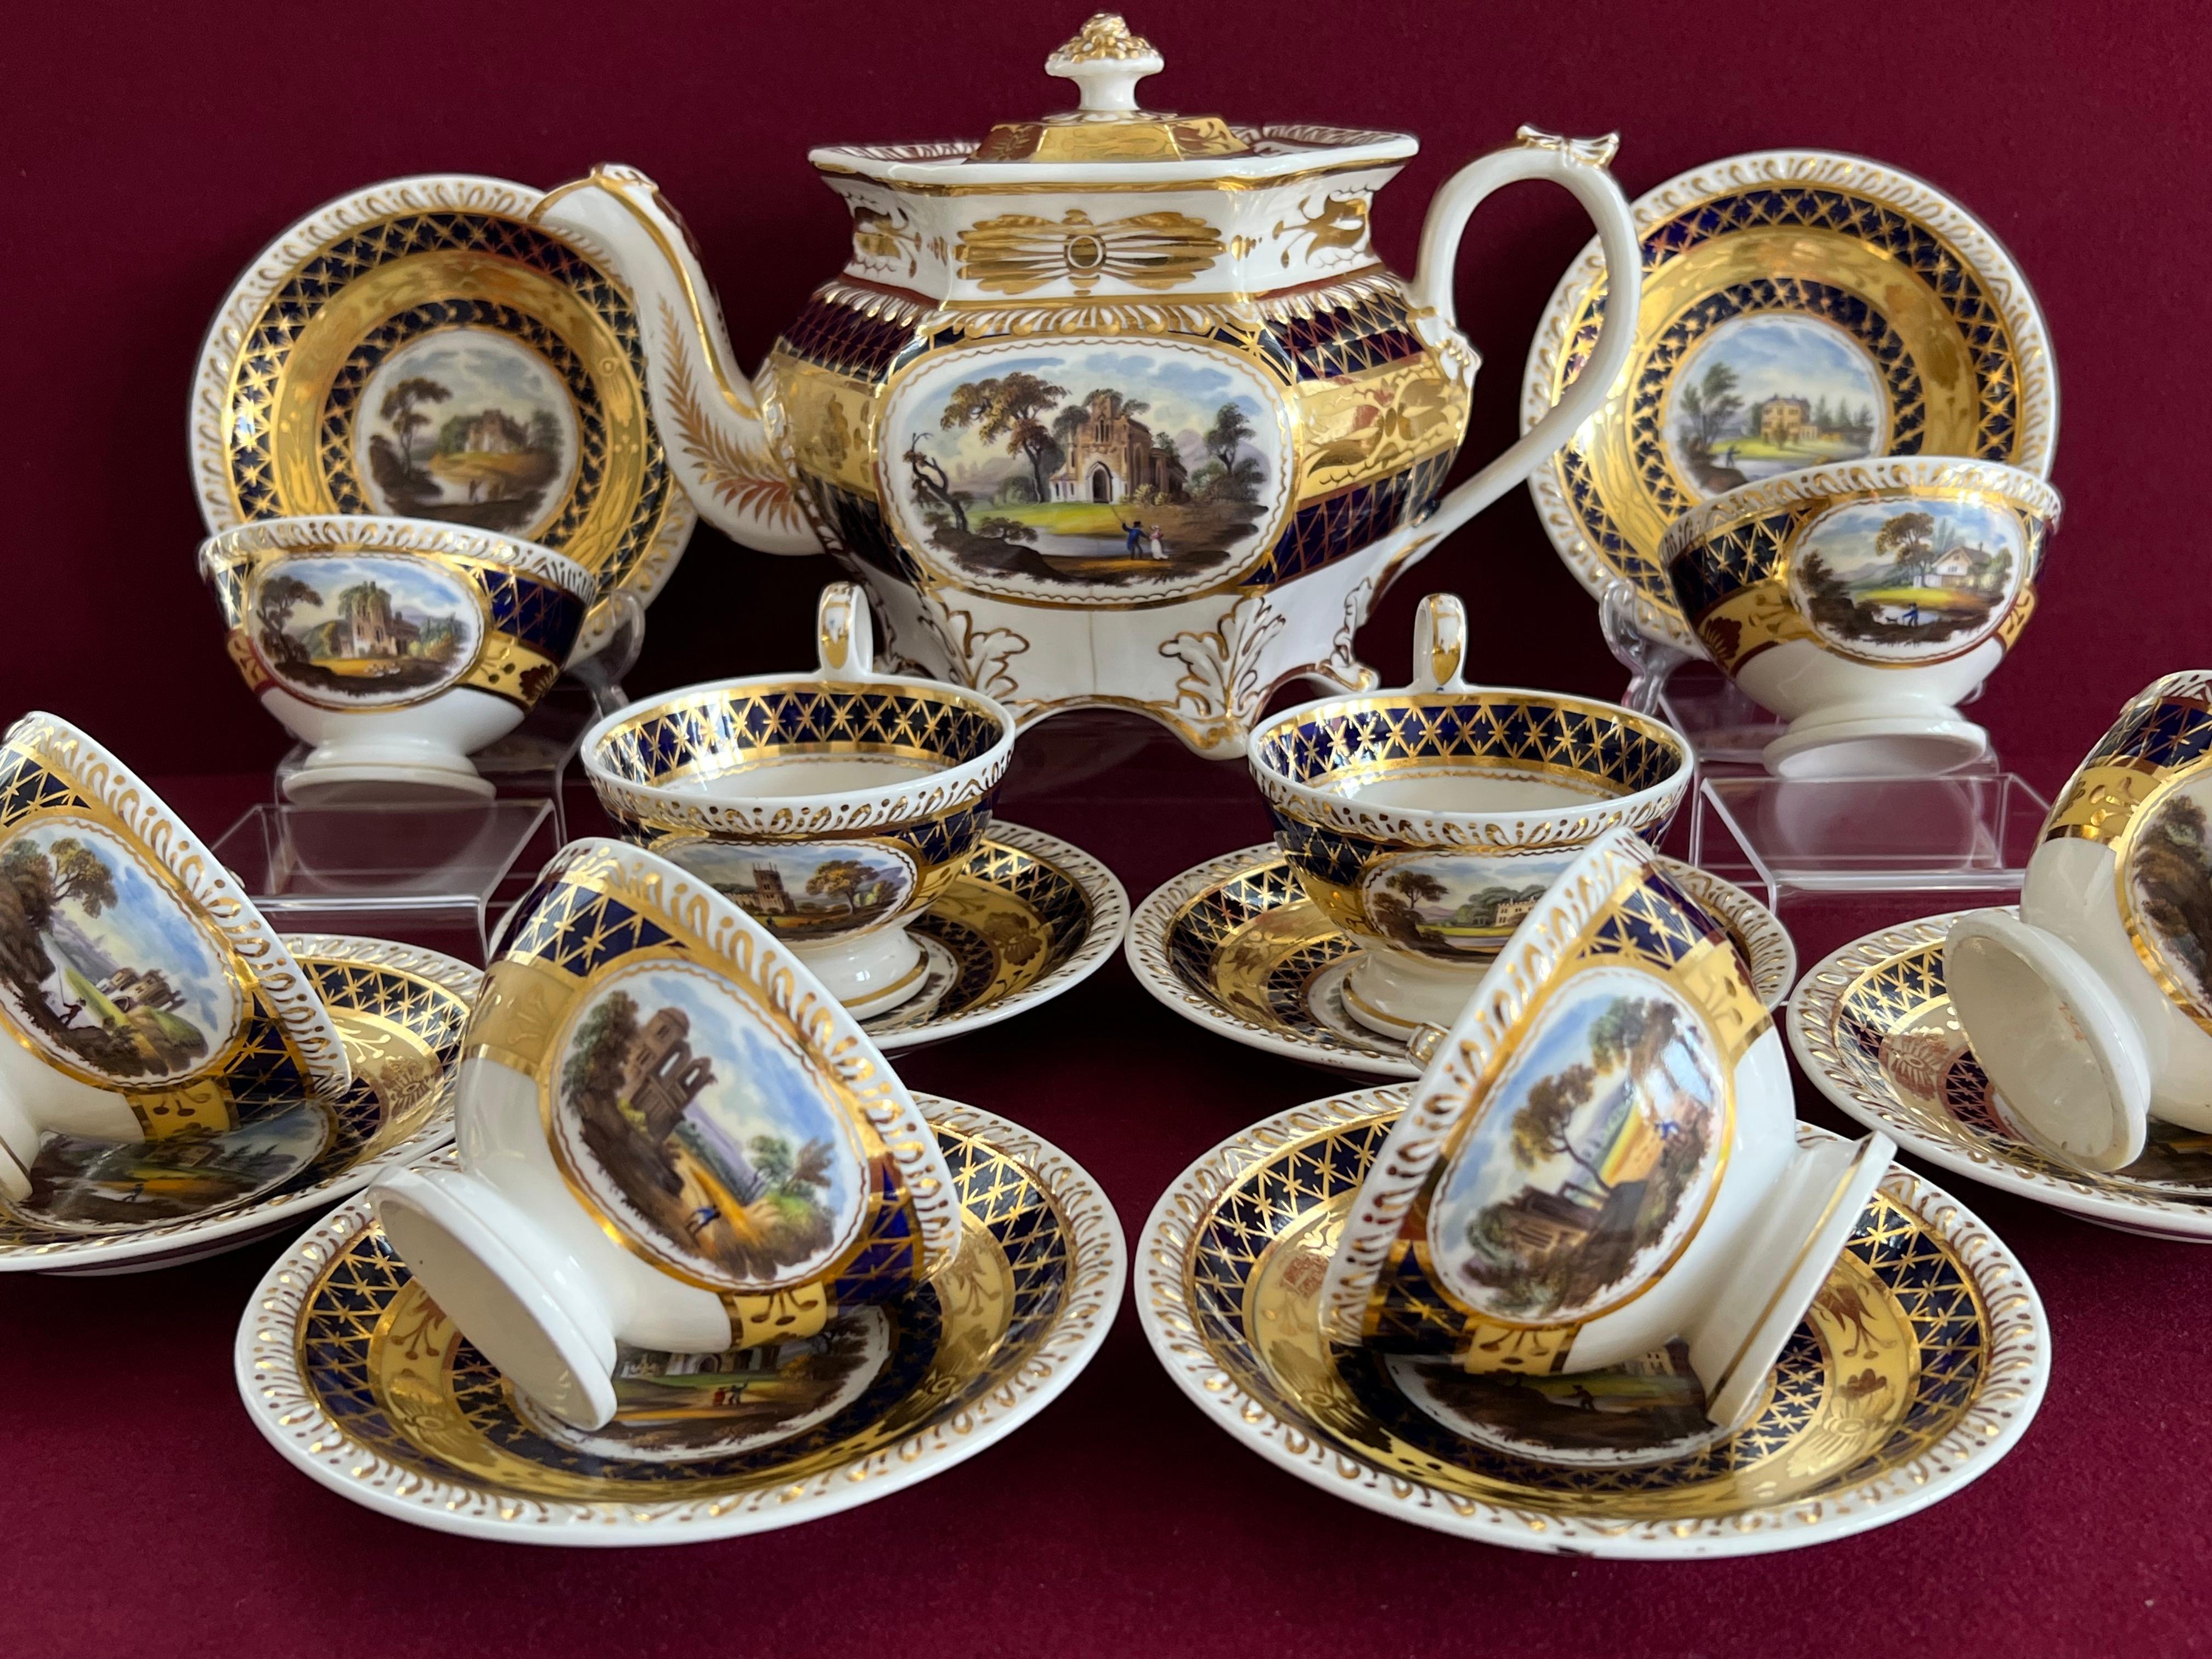 A John & William Ridgway part tea service c.1825. Consisting of 8 teacups and saucers and a teapot. Finely decorated with pattern 2/1387 gadrooned edge shape. Bone china. Bands of mazarine blue with criss-cross gilding and straw with floral gilding.